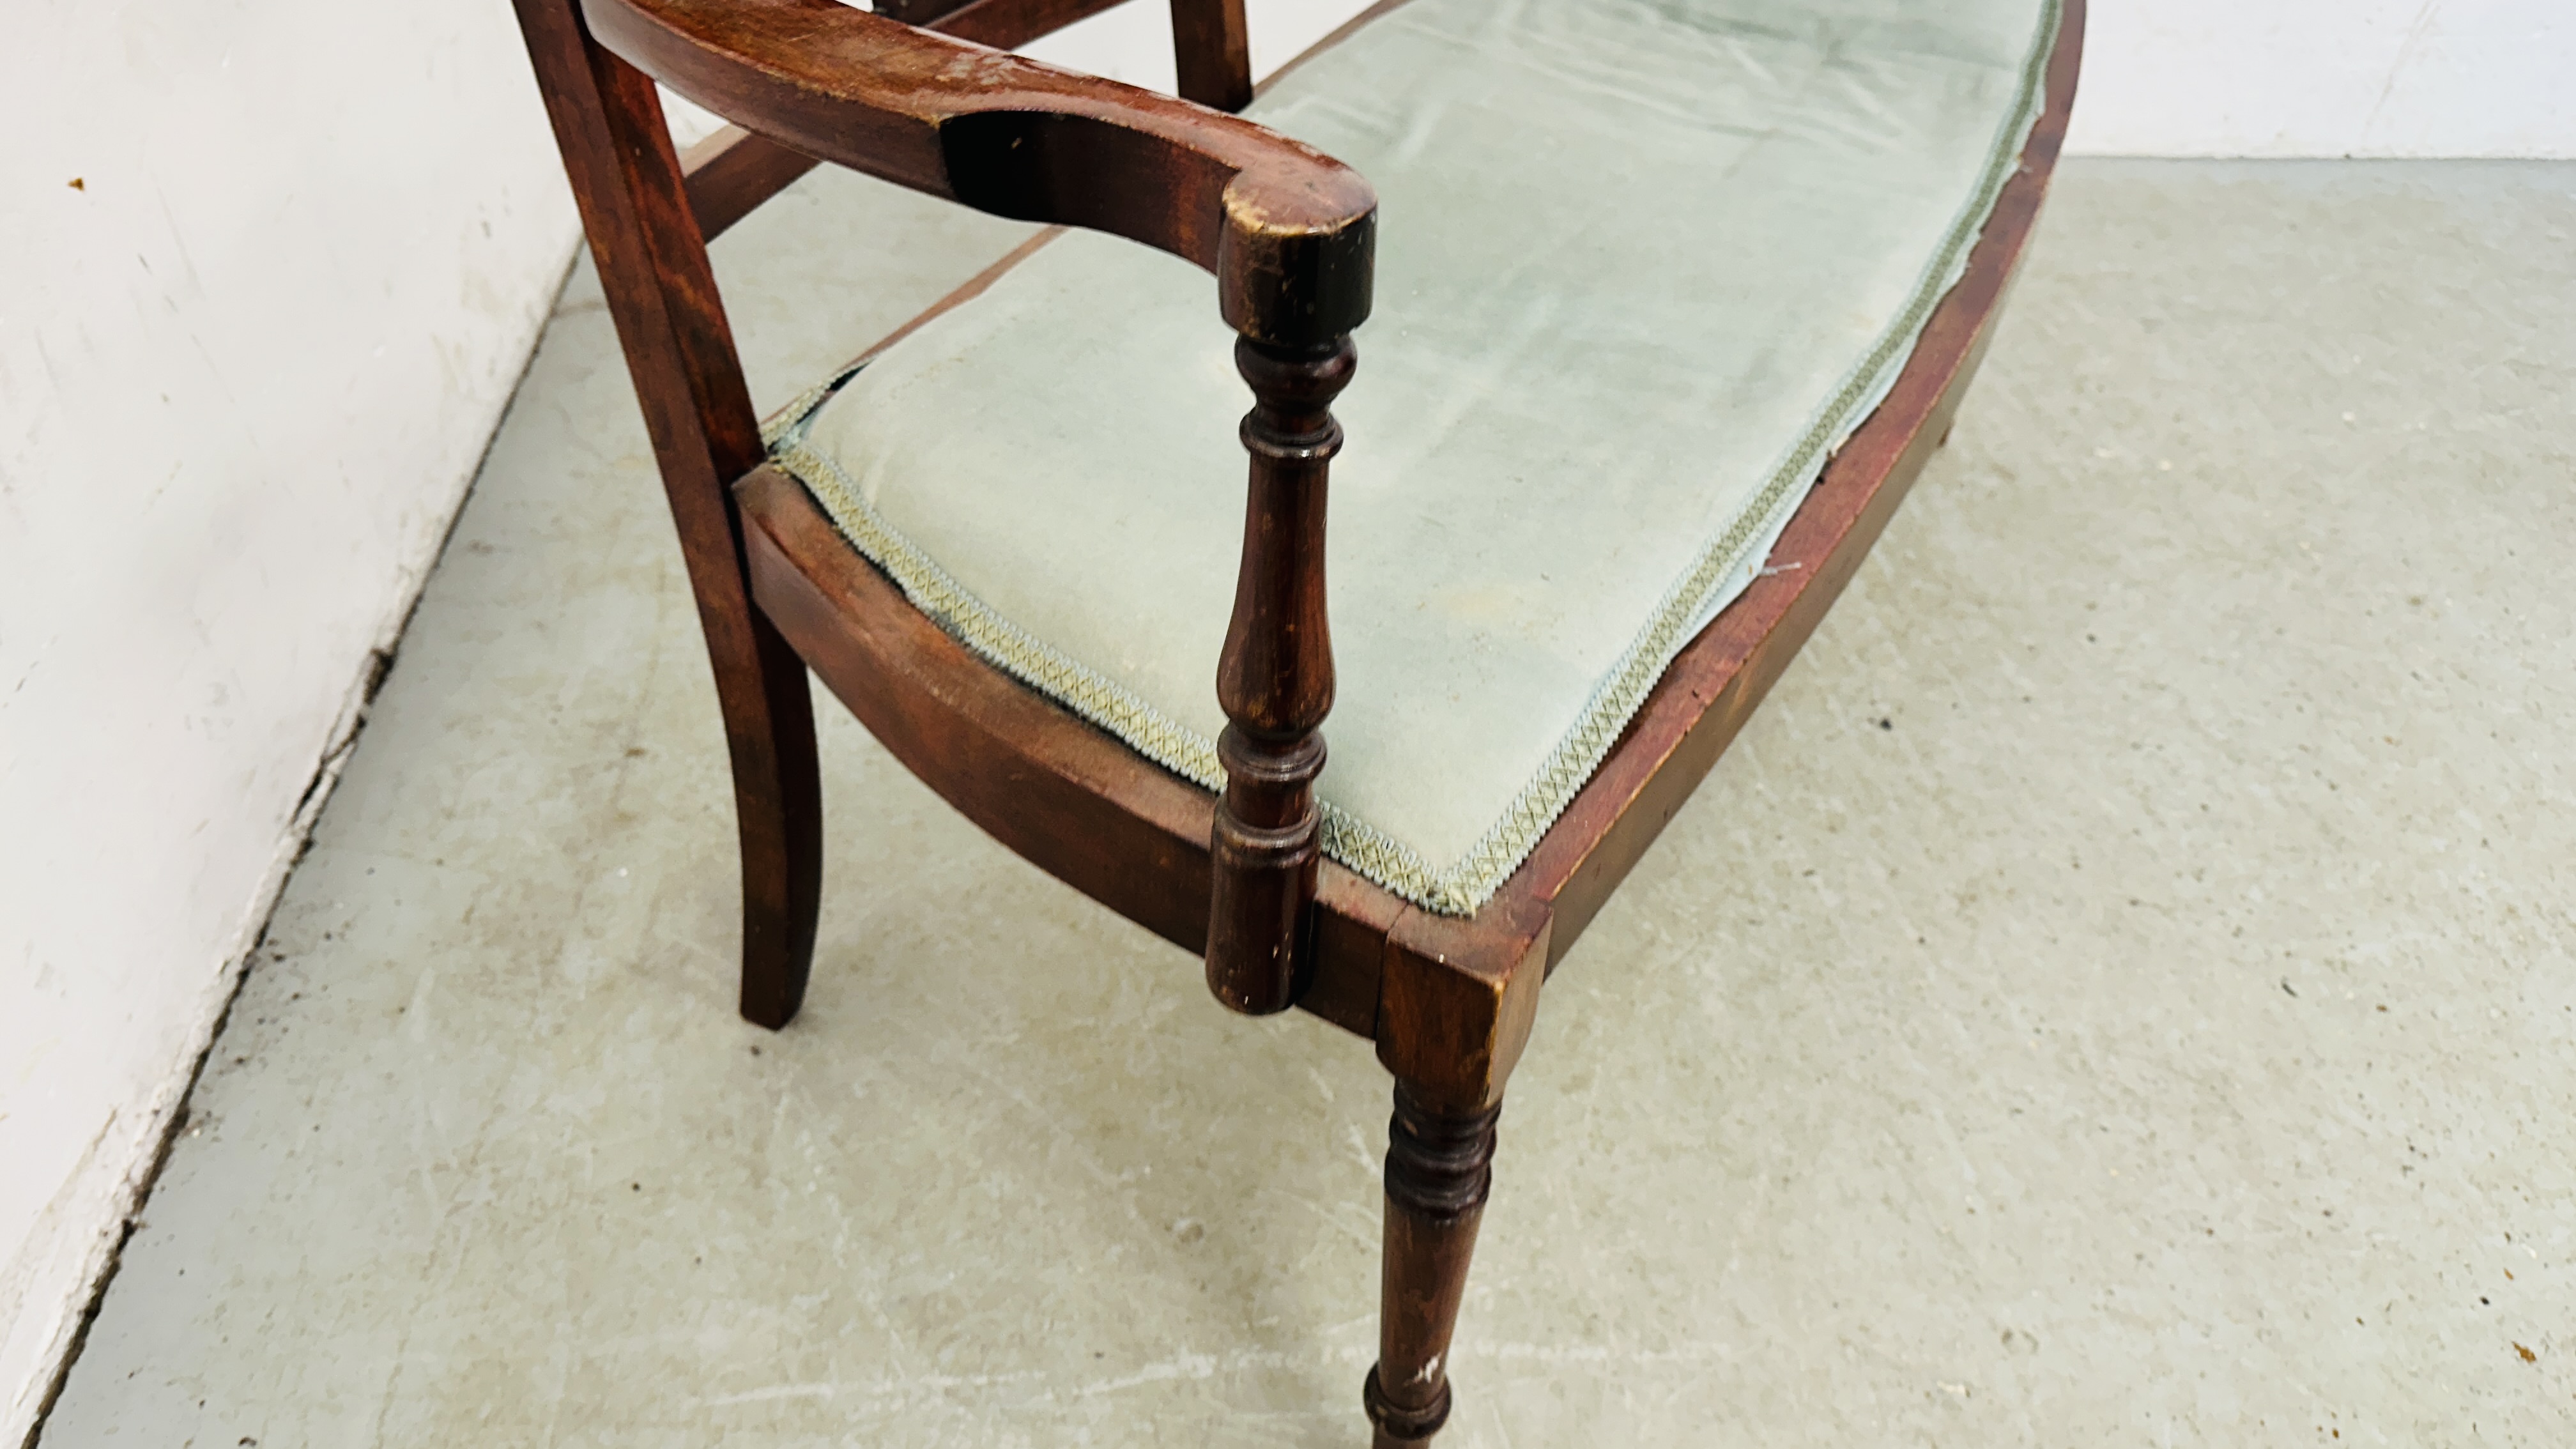 EDWARDIAN MAHOGANY 2 SEAT SOFA WITH FRETT WORK SUPPORT BACK AND GREEN UPHOLSTERY. - Image 8 of 11